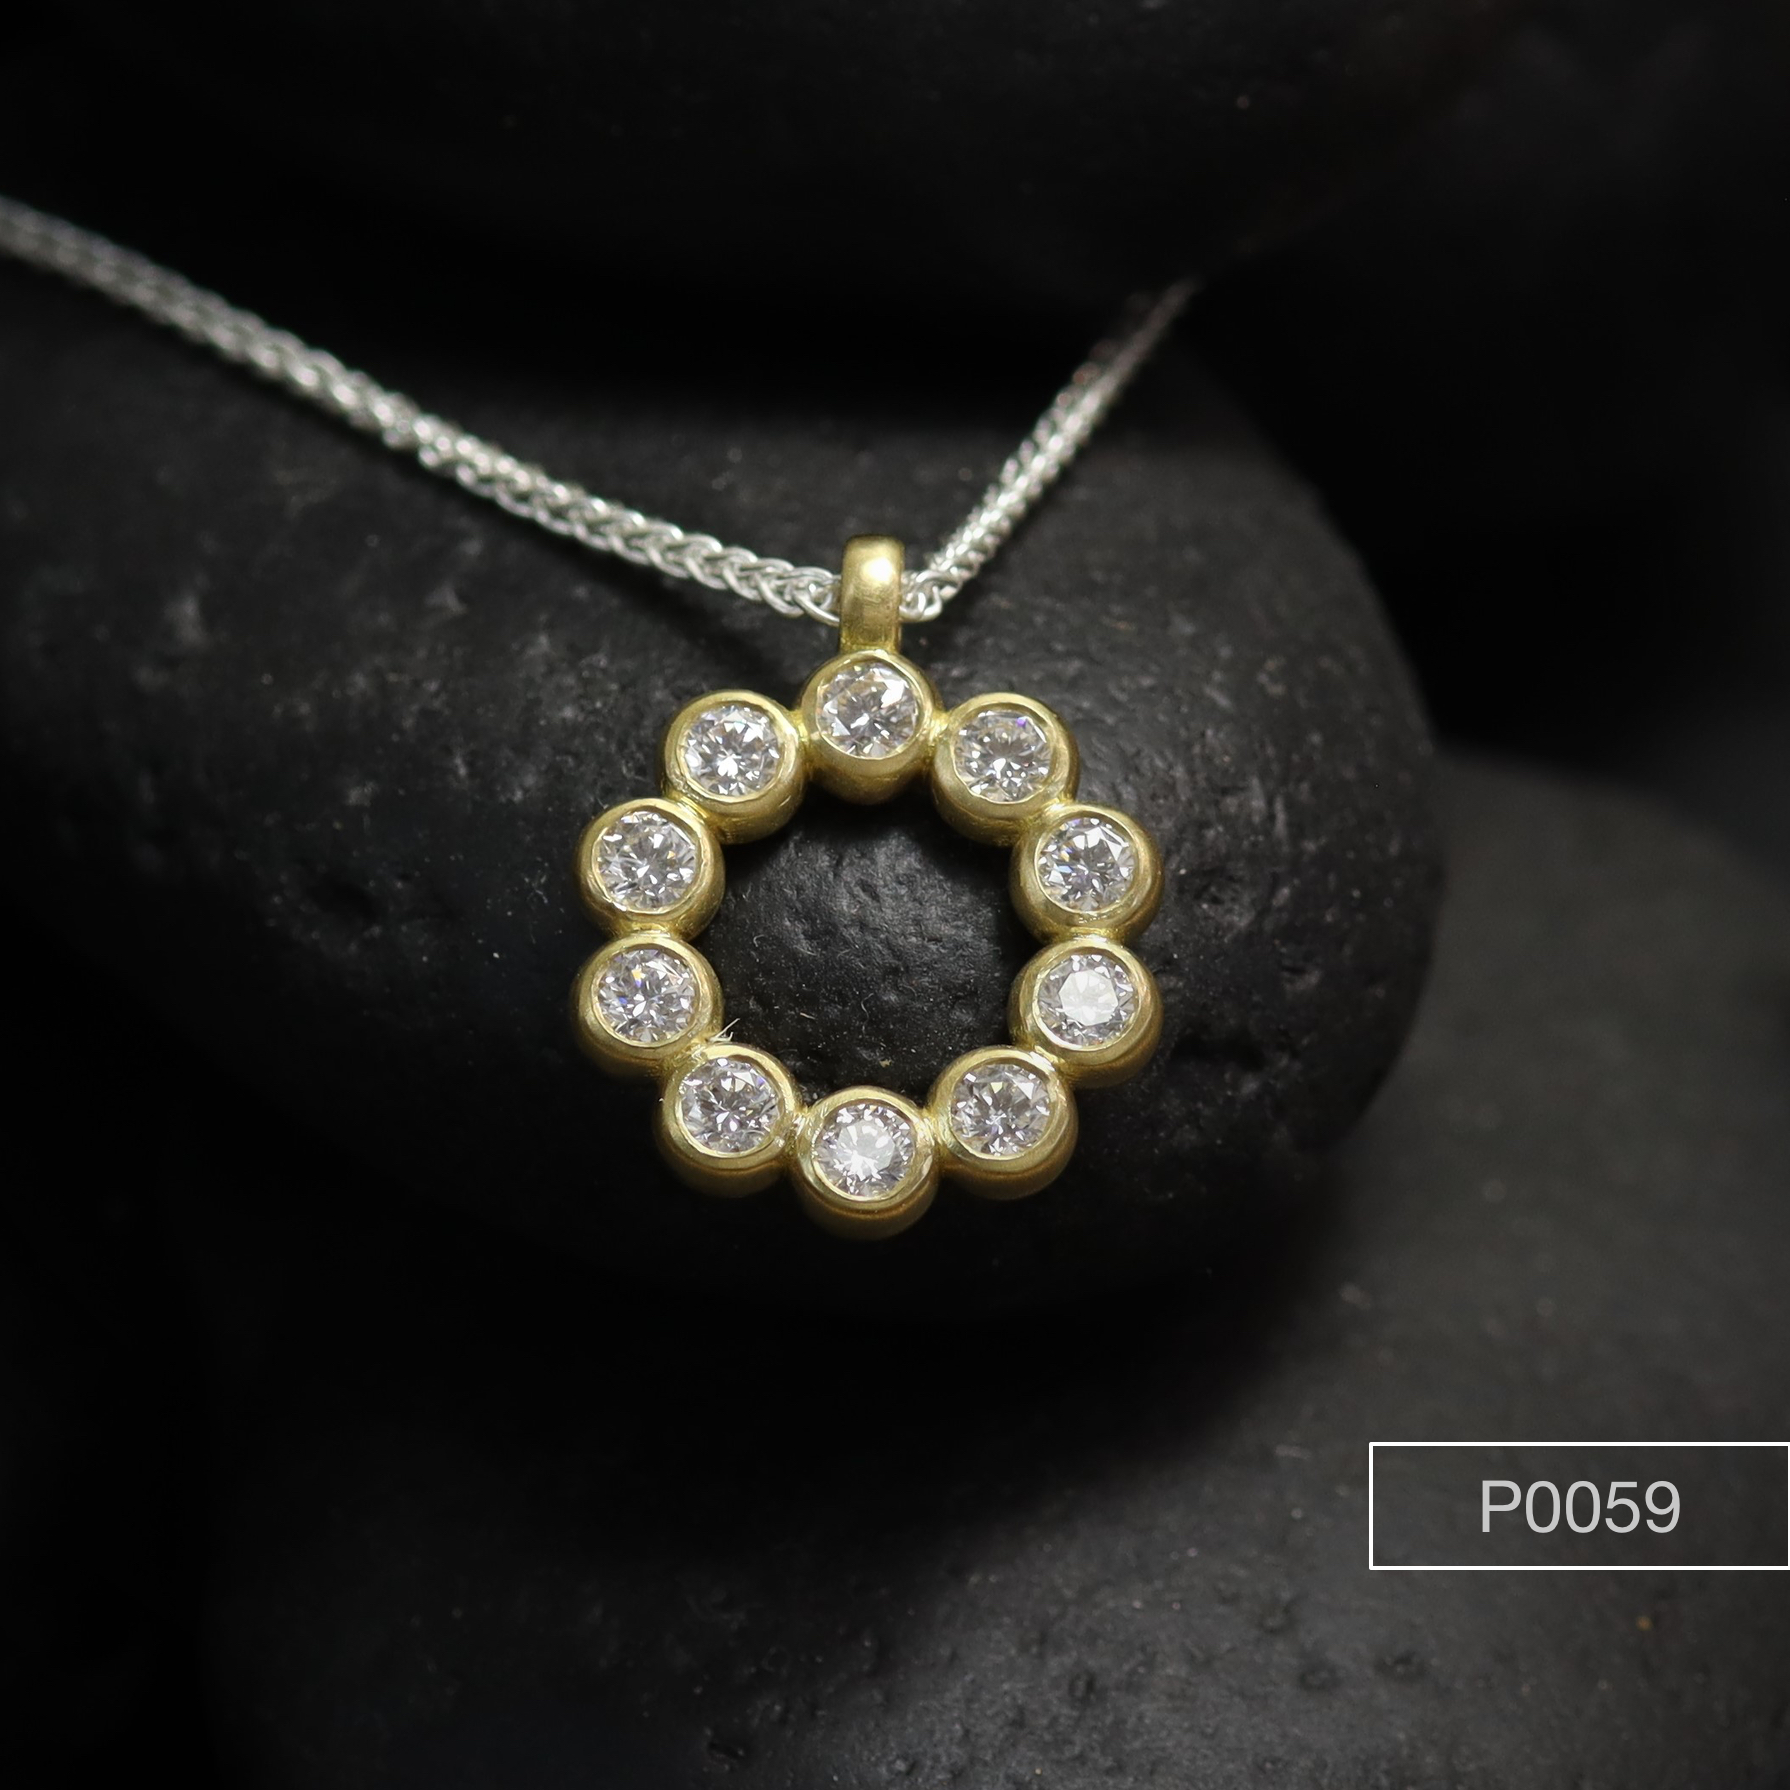 Frosted 18ct gold, Diamond set pendent.